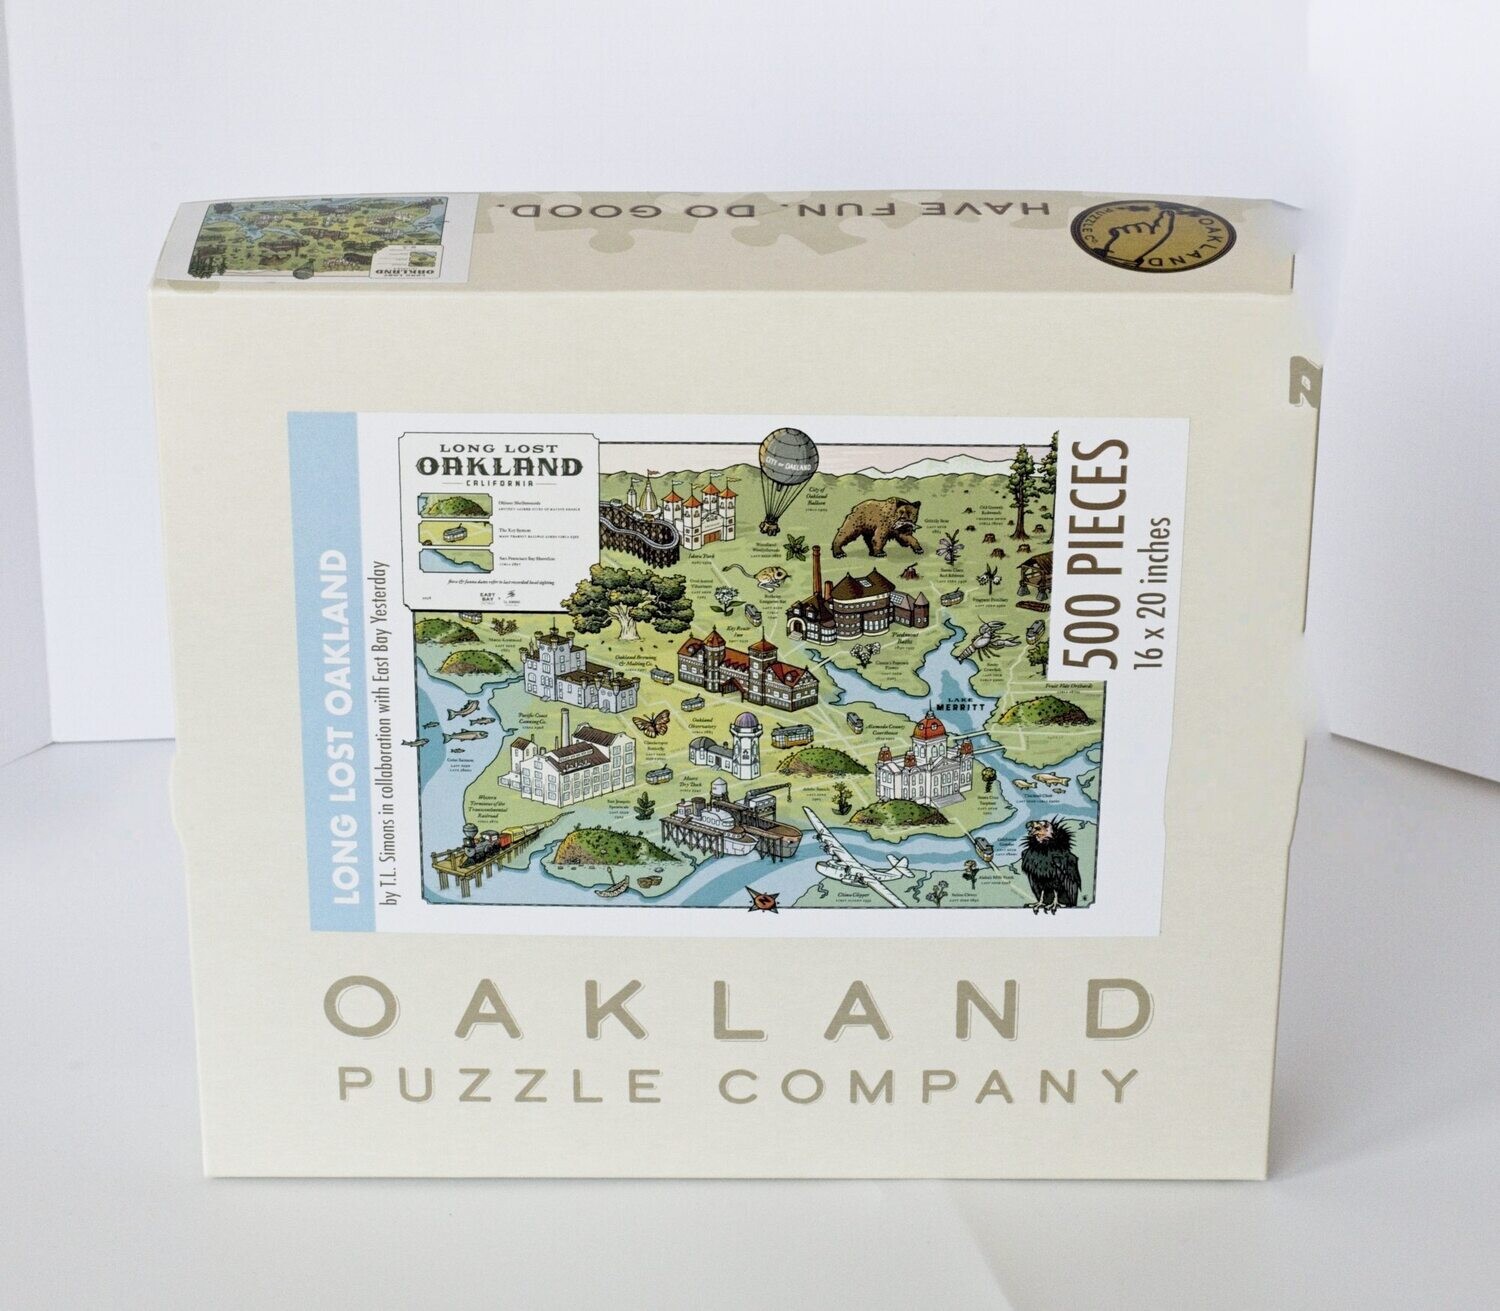 Long Lost Oakland 500-piece Jigsaw Puzzle